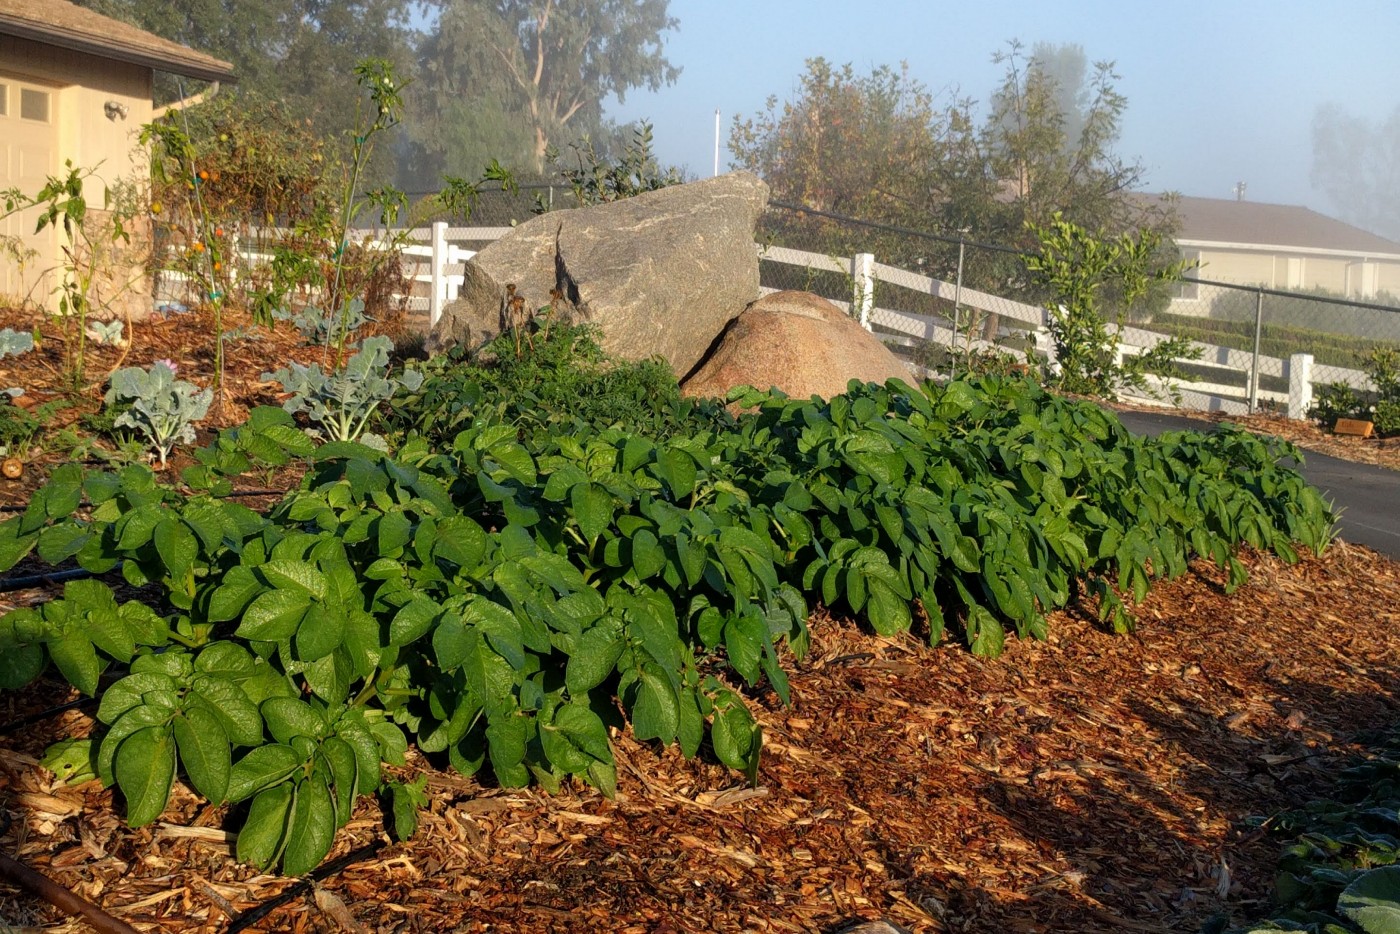 Image of Wood chip mulch in vegetable garden